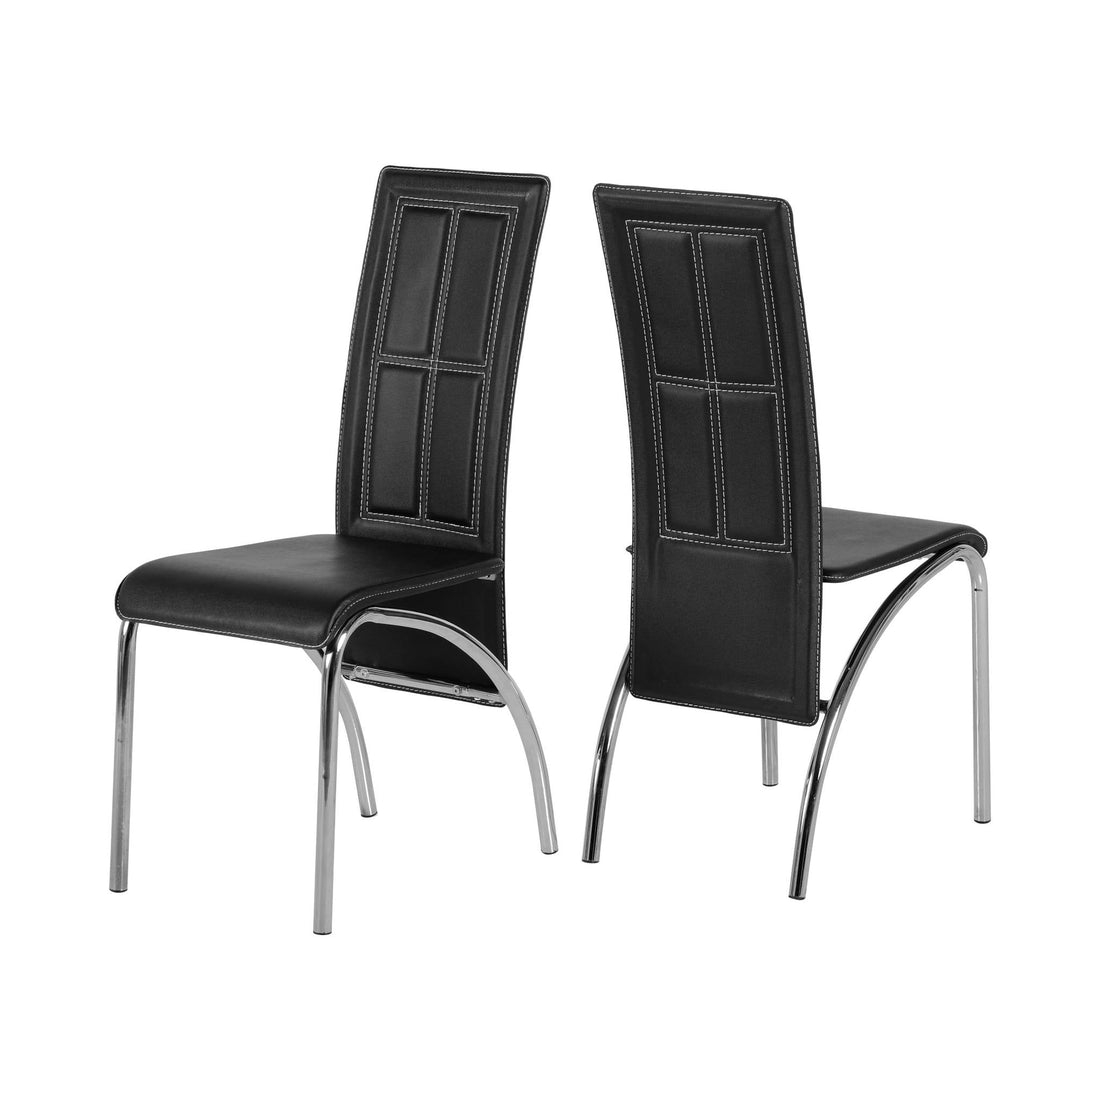 A3 Chair (Black Faux Leather/Chrome) | Set of 2